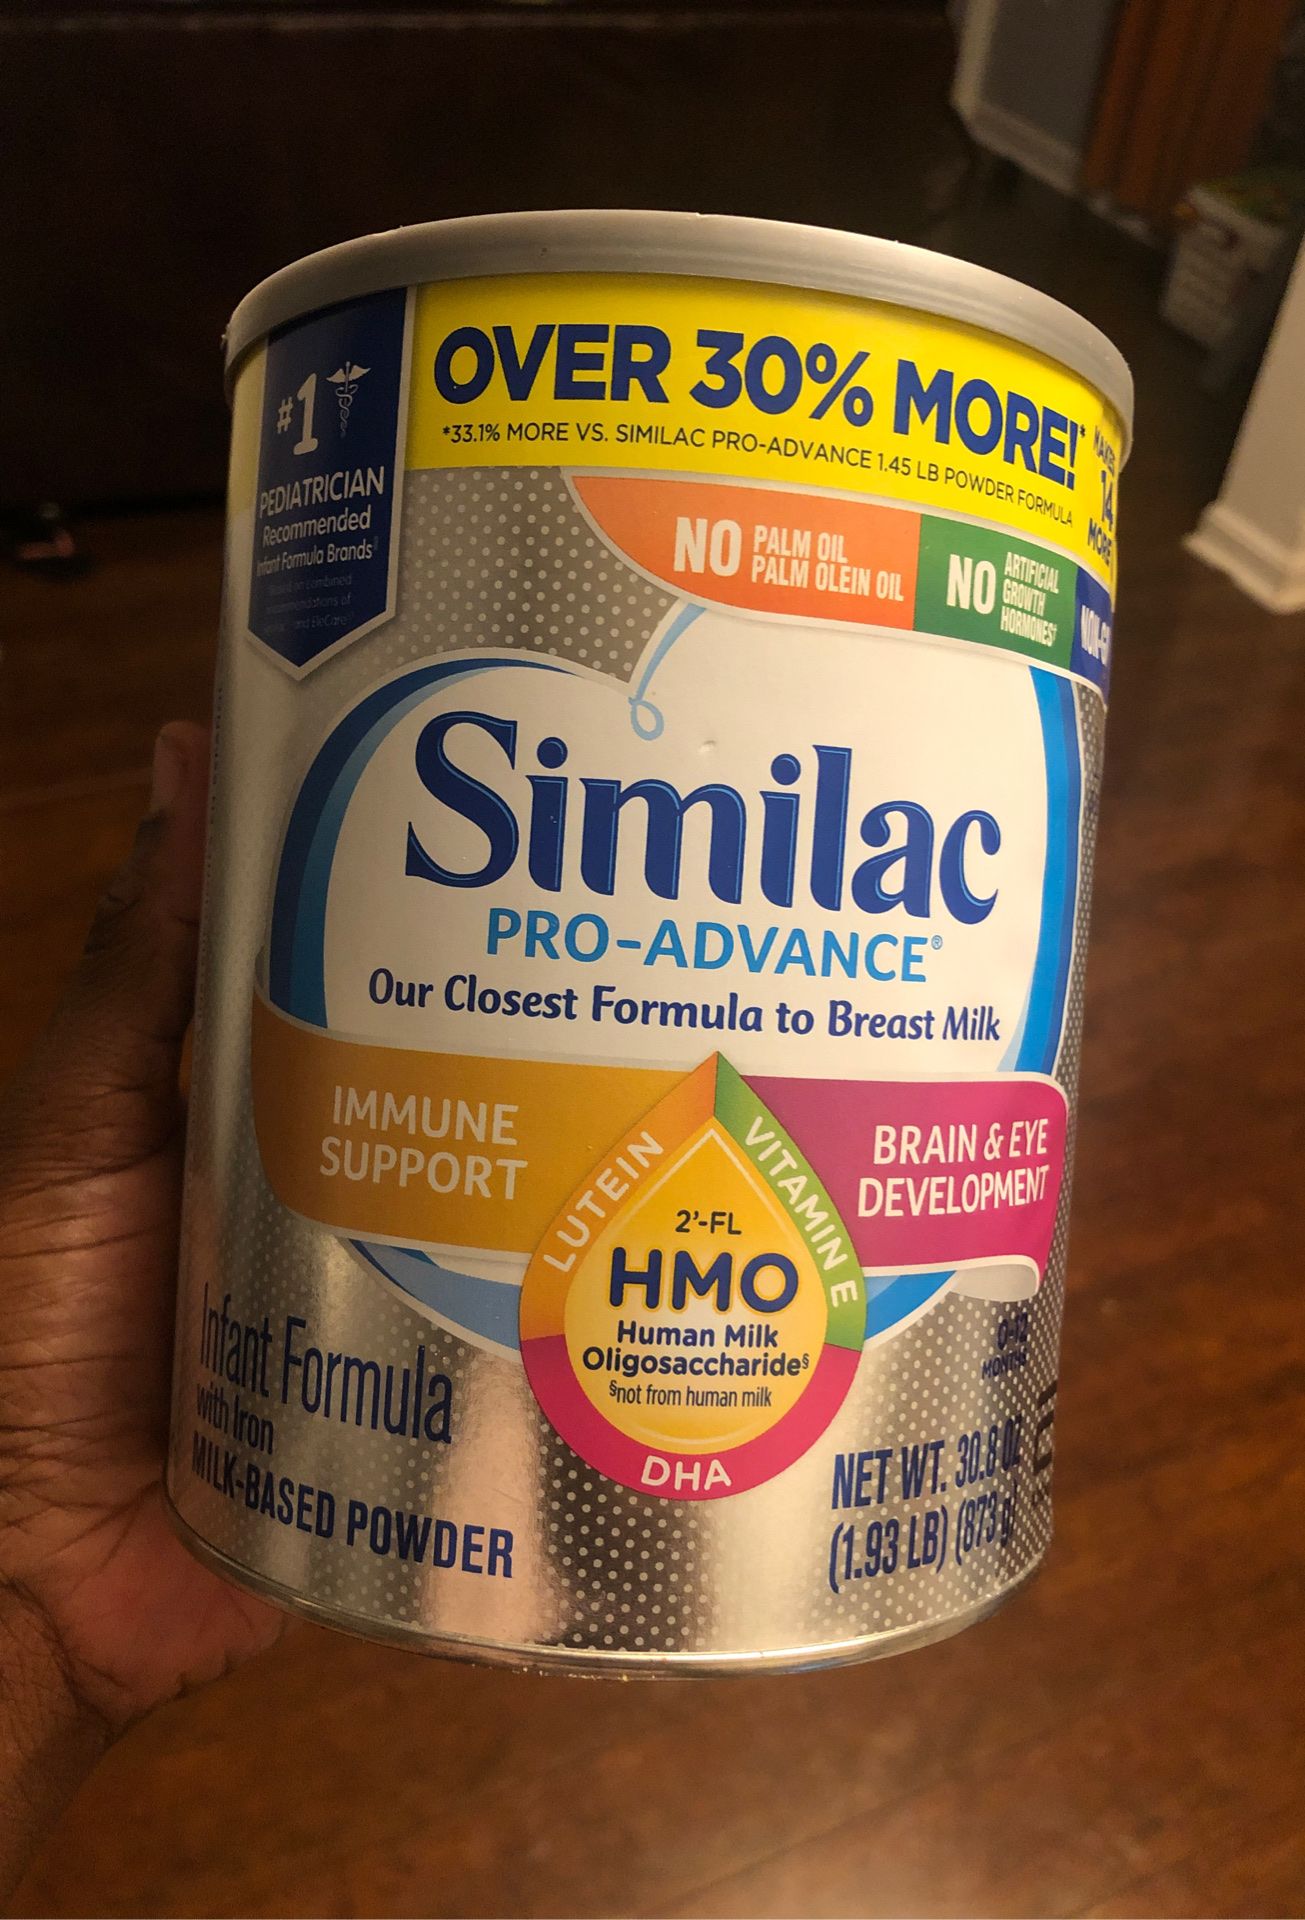 1 can of Similac Pro-Advance and 1 box of Luvs size 1 (252 diapers)